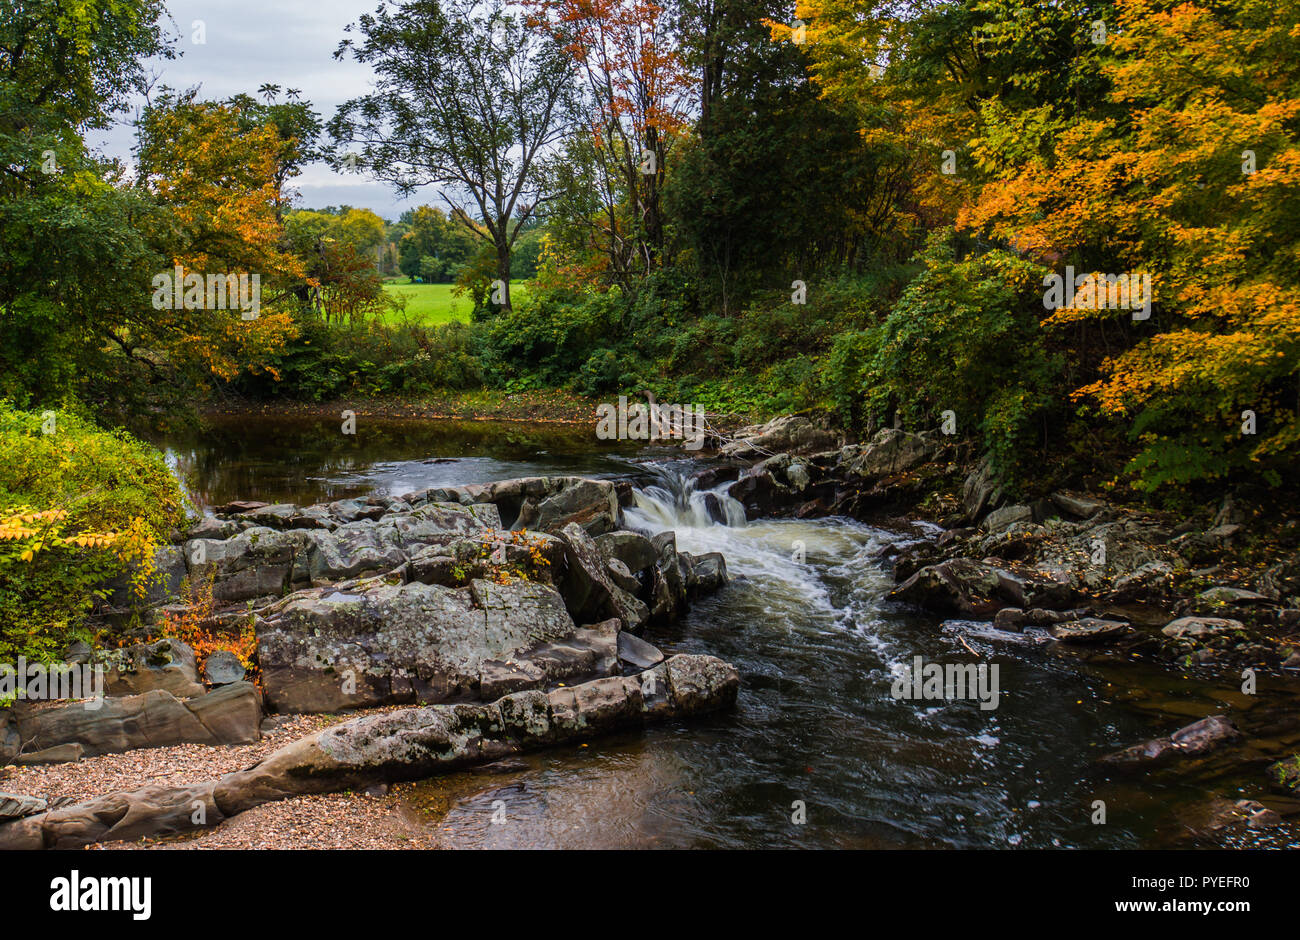 water flowing over rocky creek bed with golden hues of fall autumn foliage Stock Photo